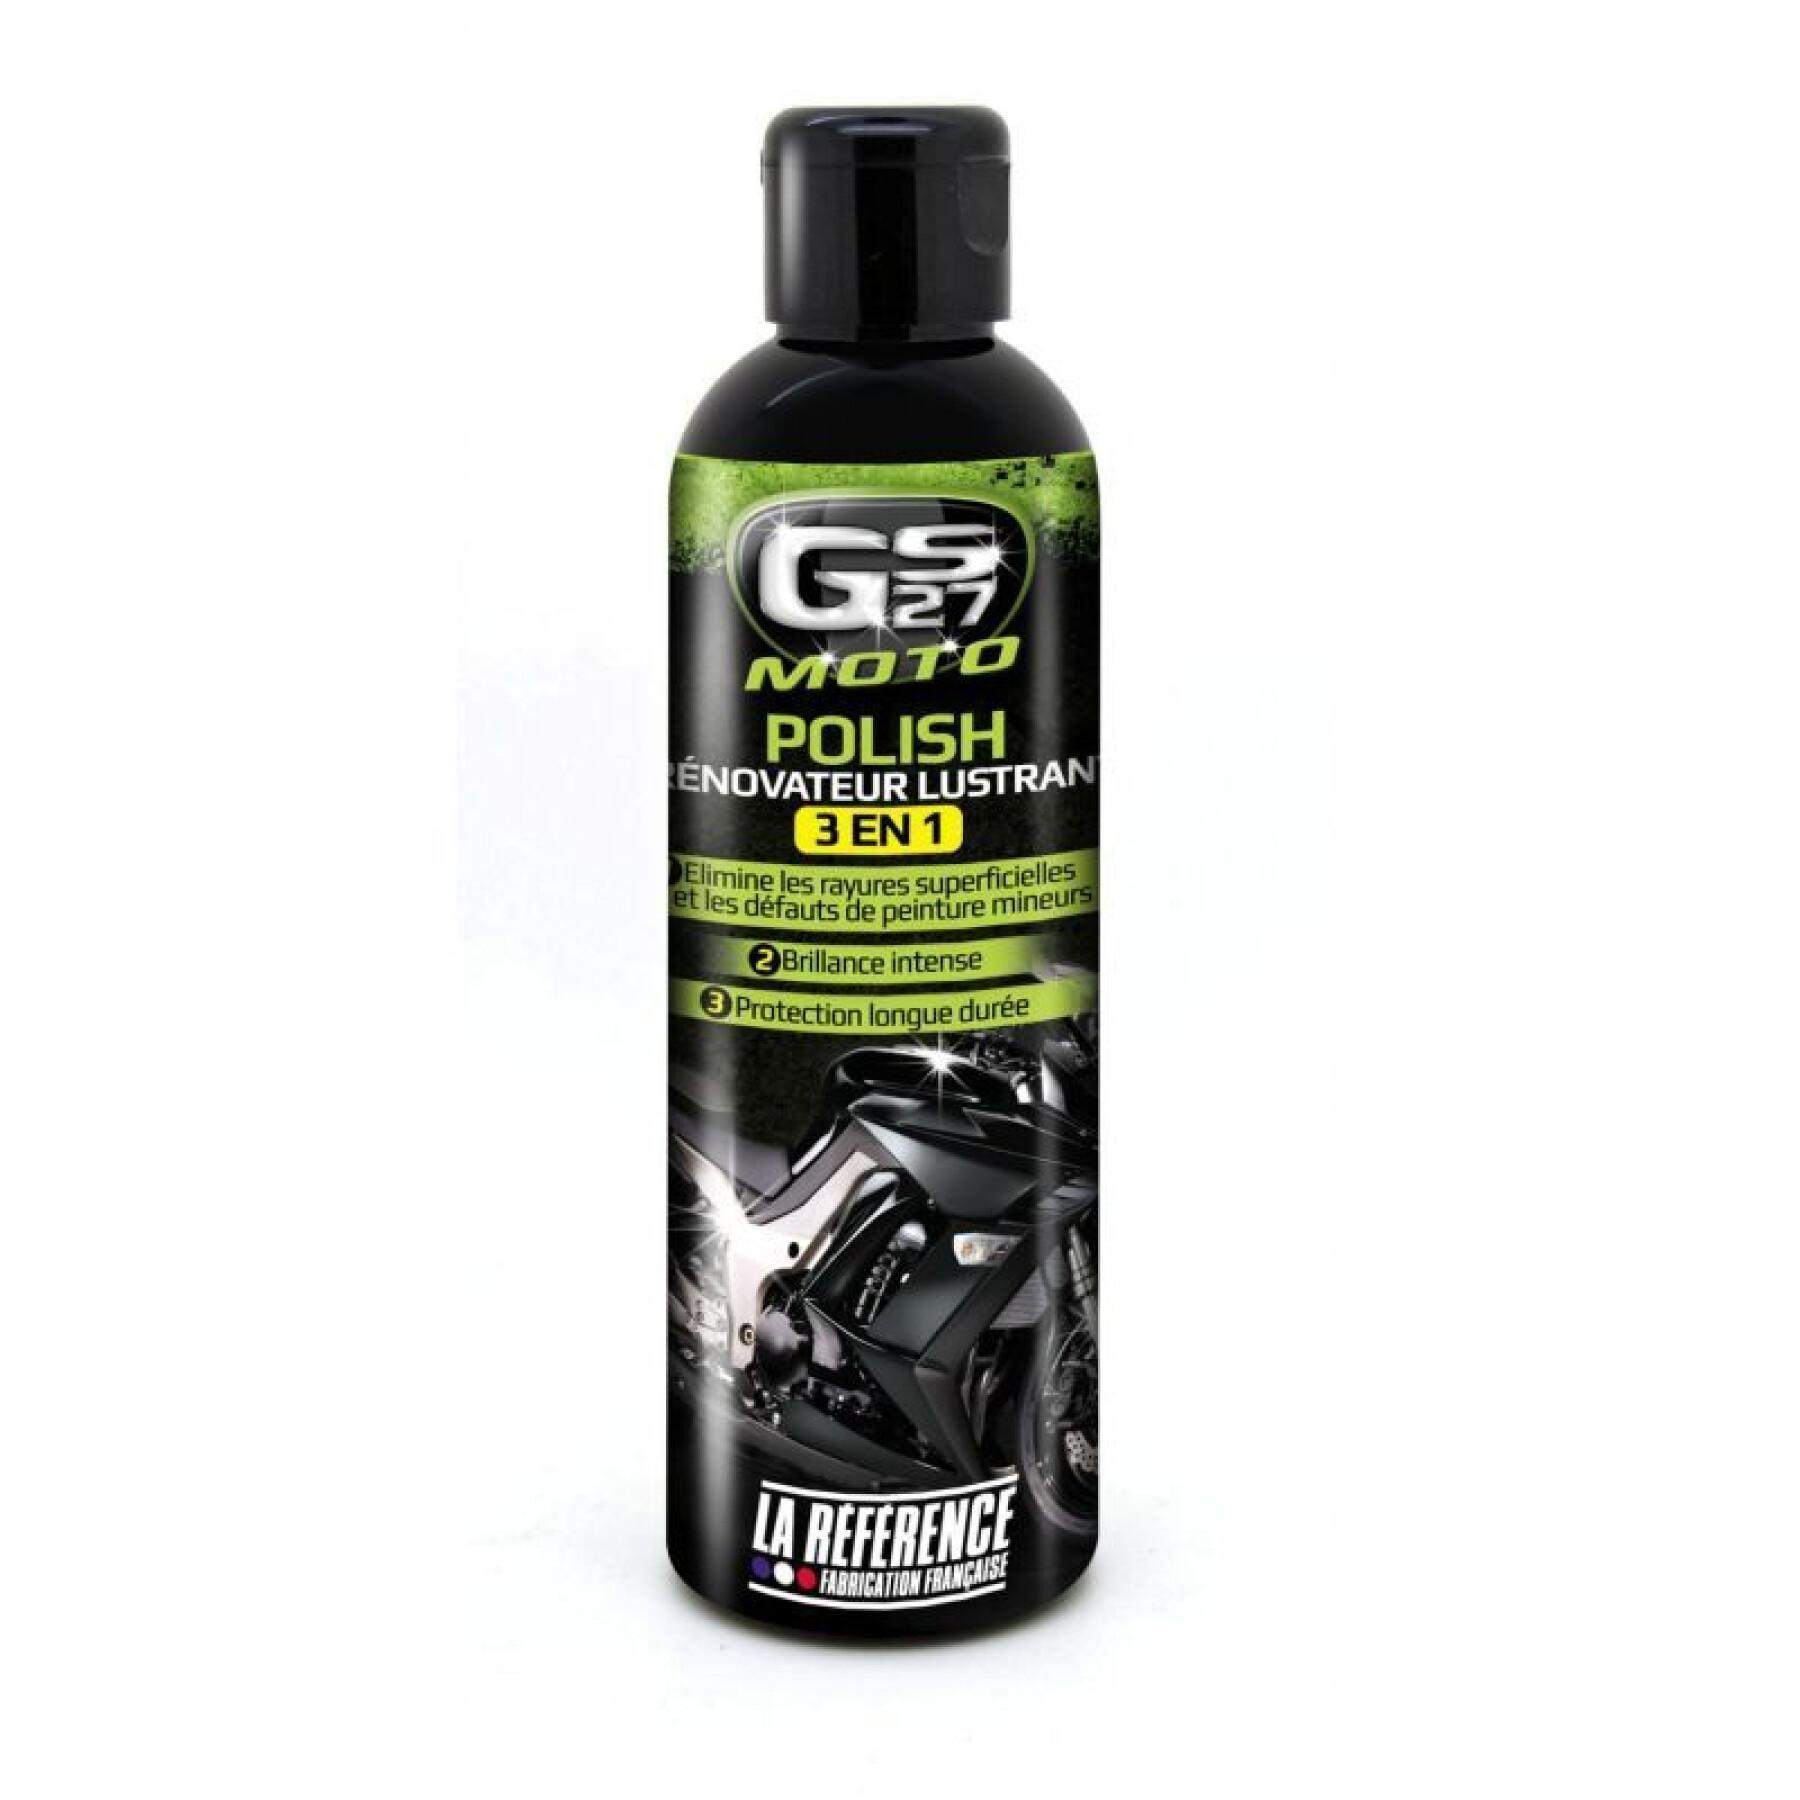 Pack of 6 3-in-1 motorcycle polish renovator GS27